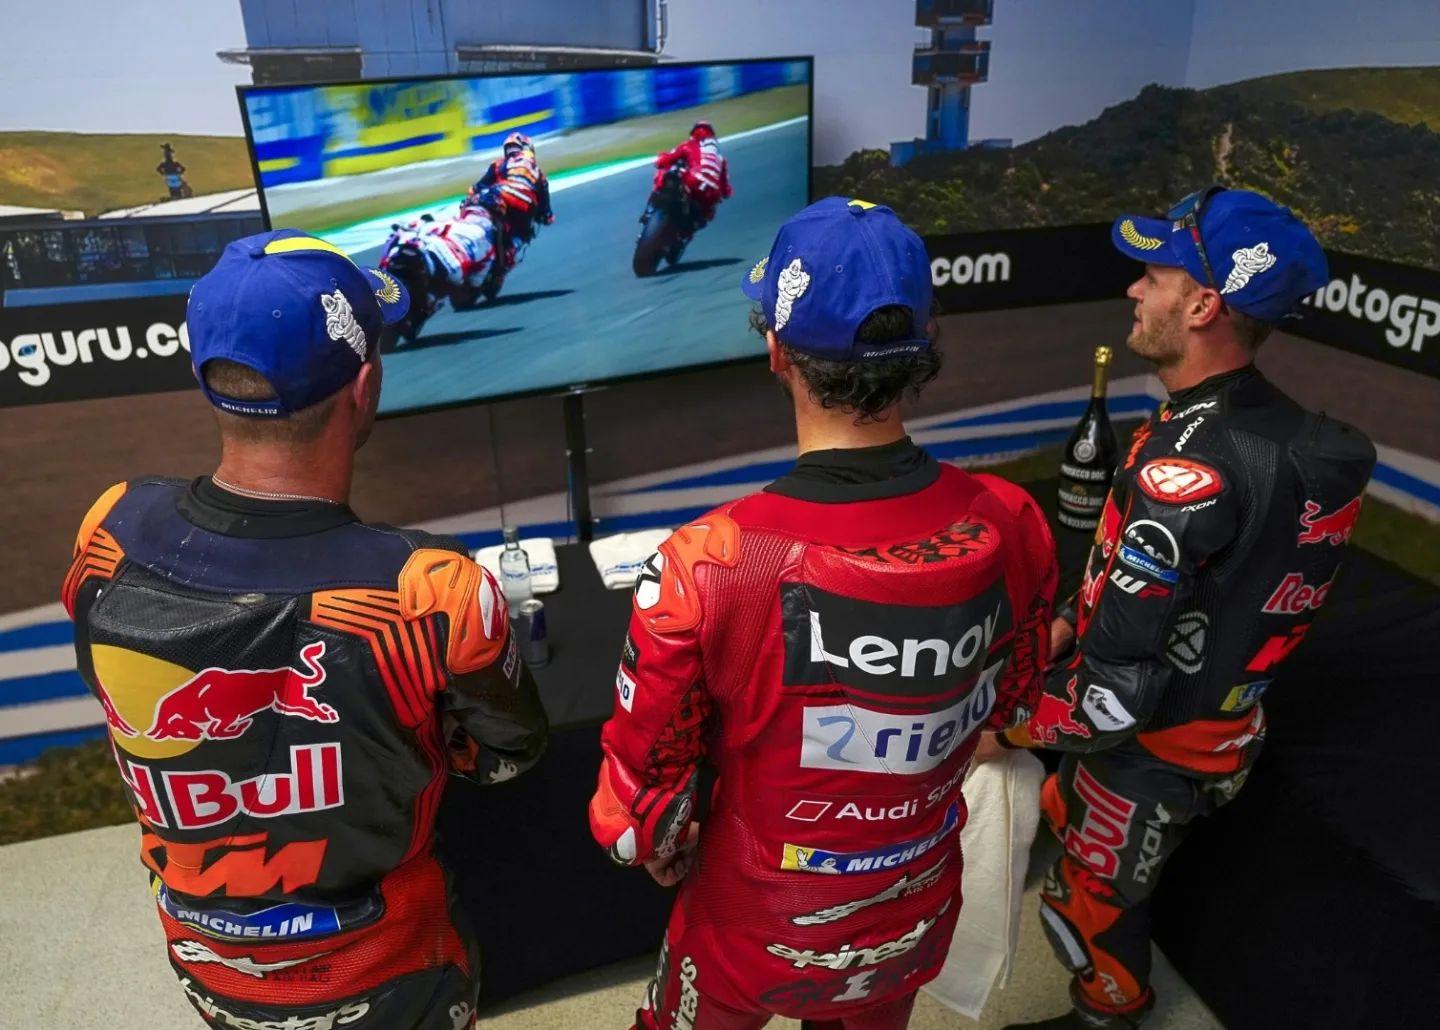 Does MotoGP need to take lessons from F1 once again, albeit improved upon?